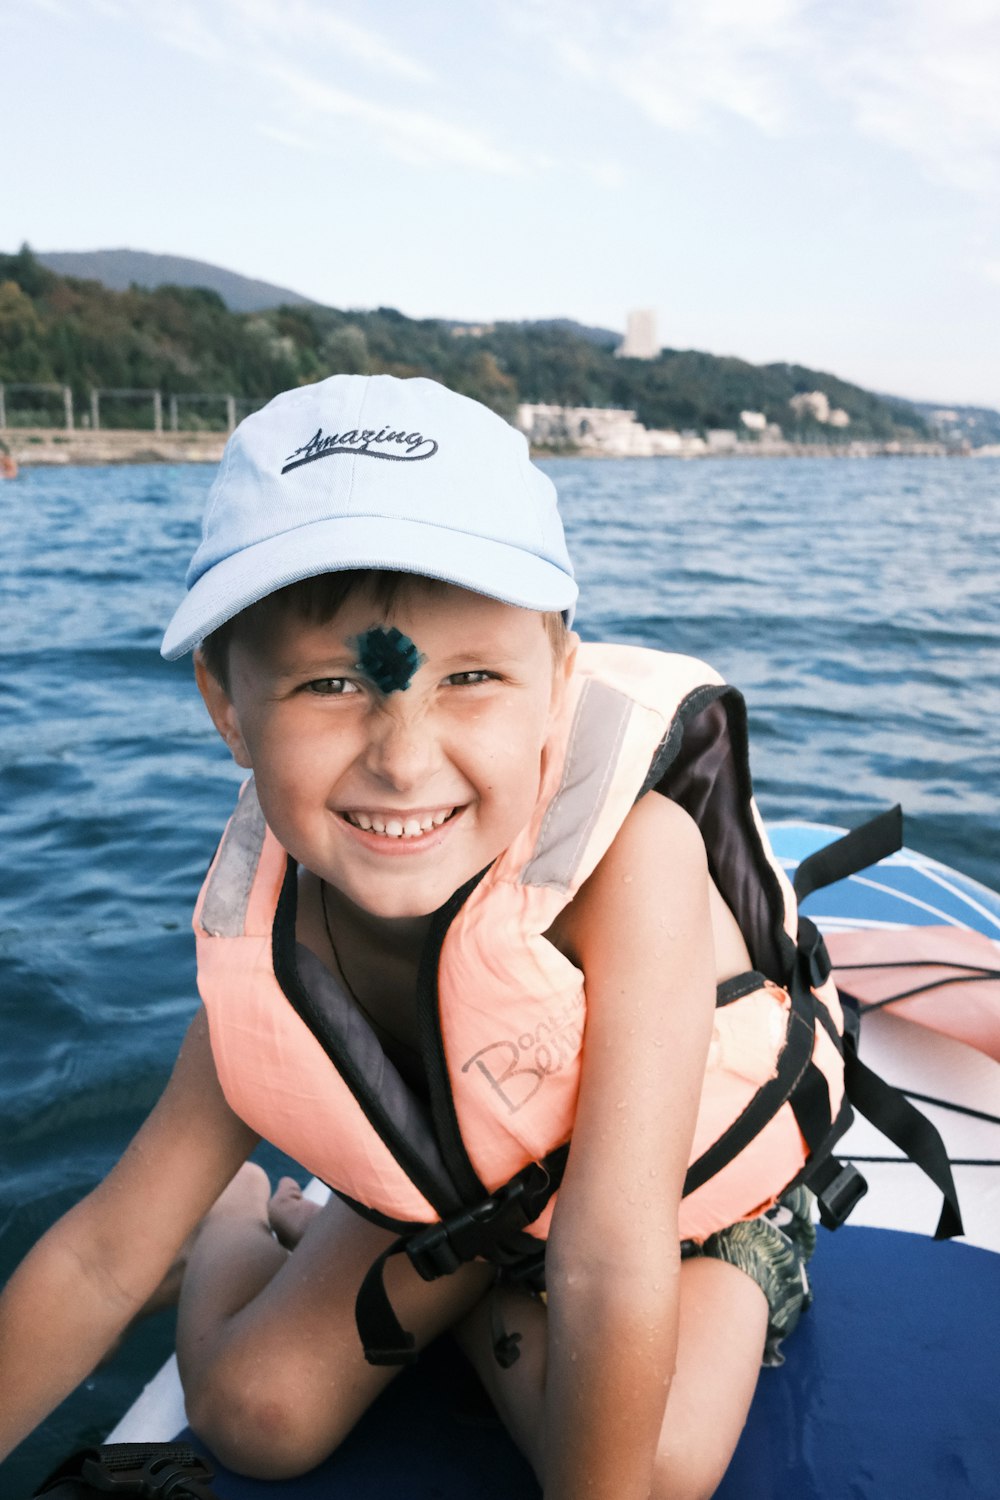 a young boy in a life jacket on a boat